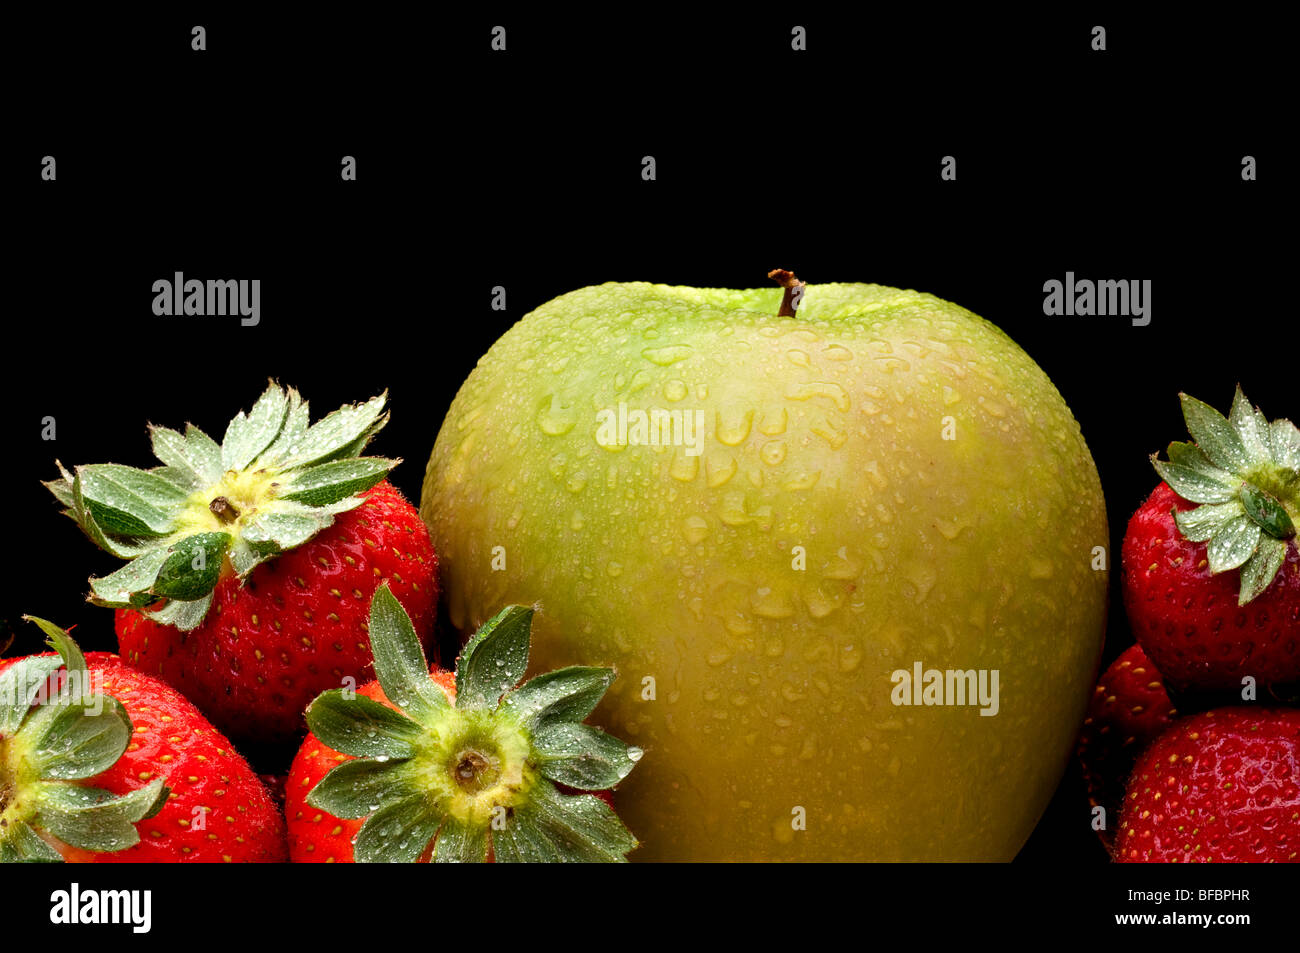 A green apple and red strawberries on black Stock Photo